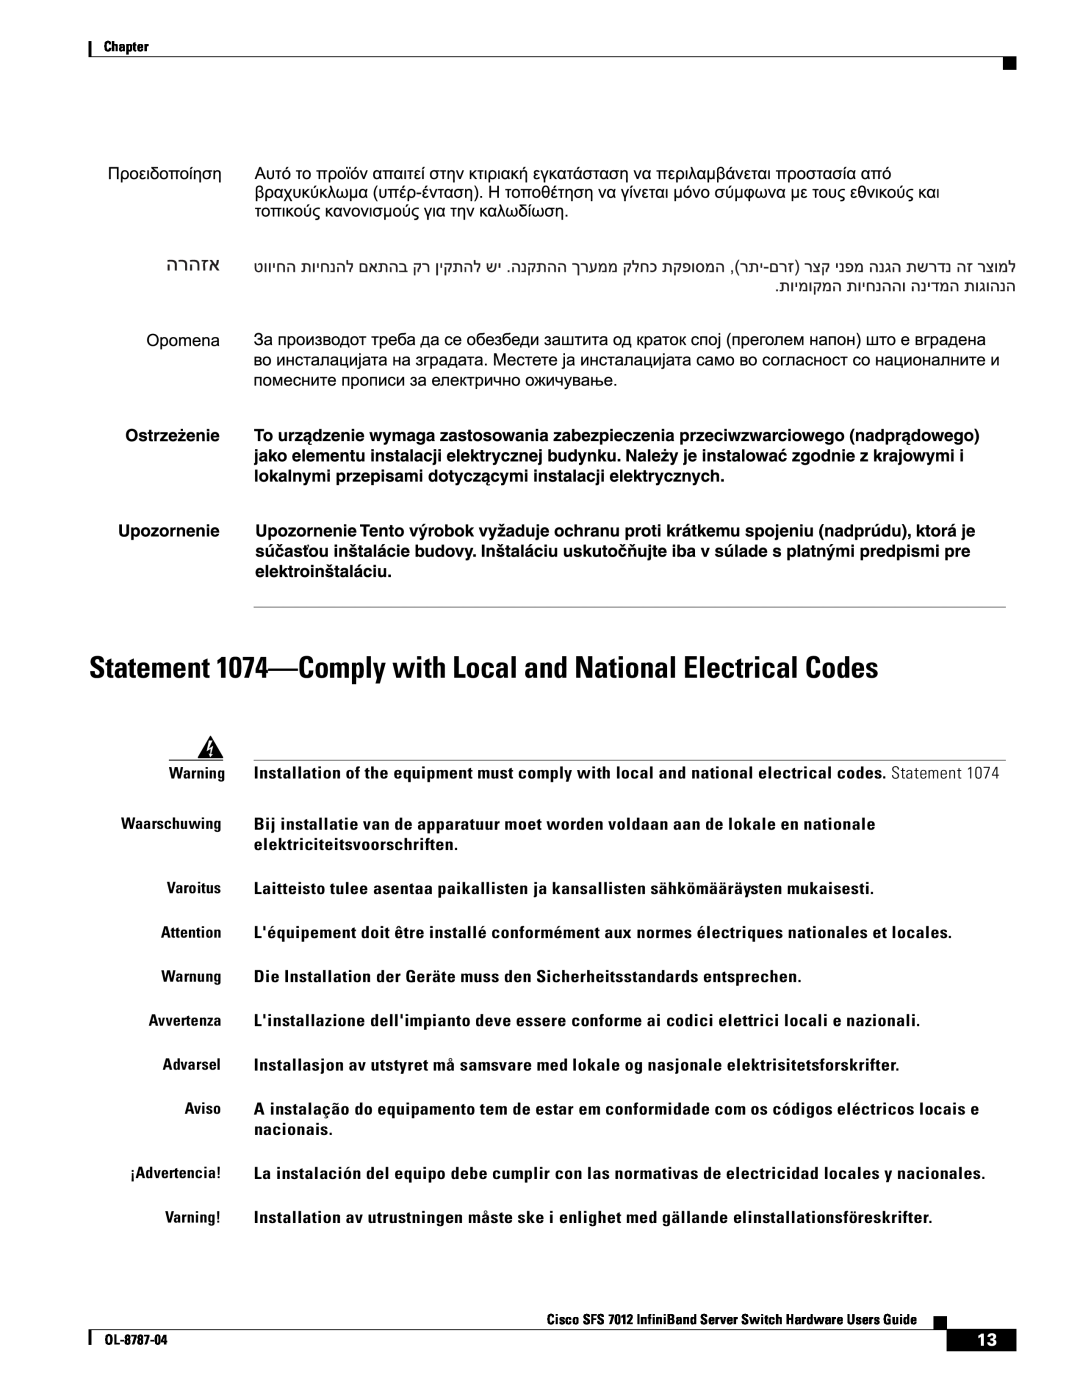 Cisco Systems SFS 7012 manual Statement 1074-Comply with Local and National Electrical Codes 